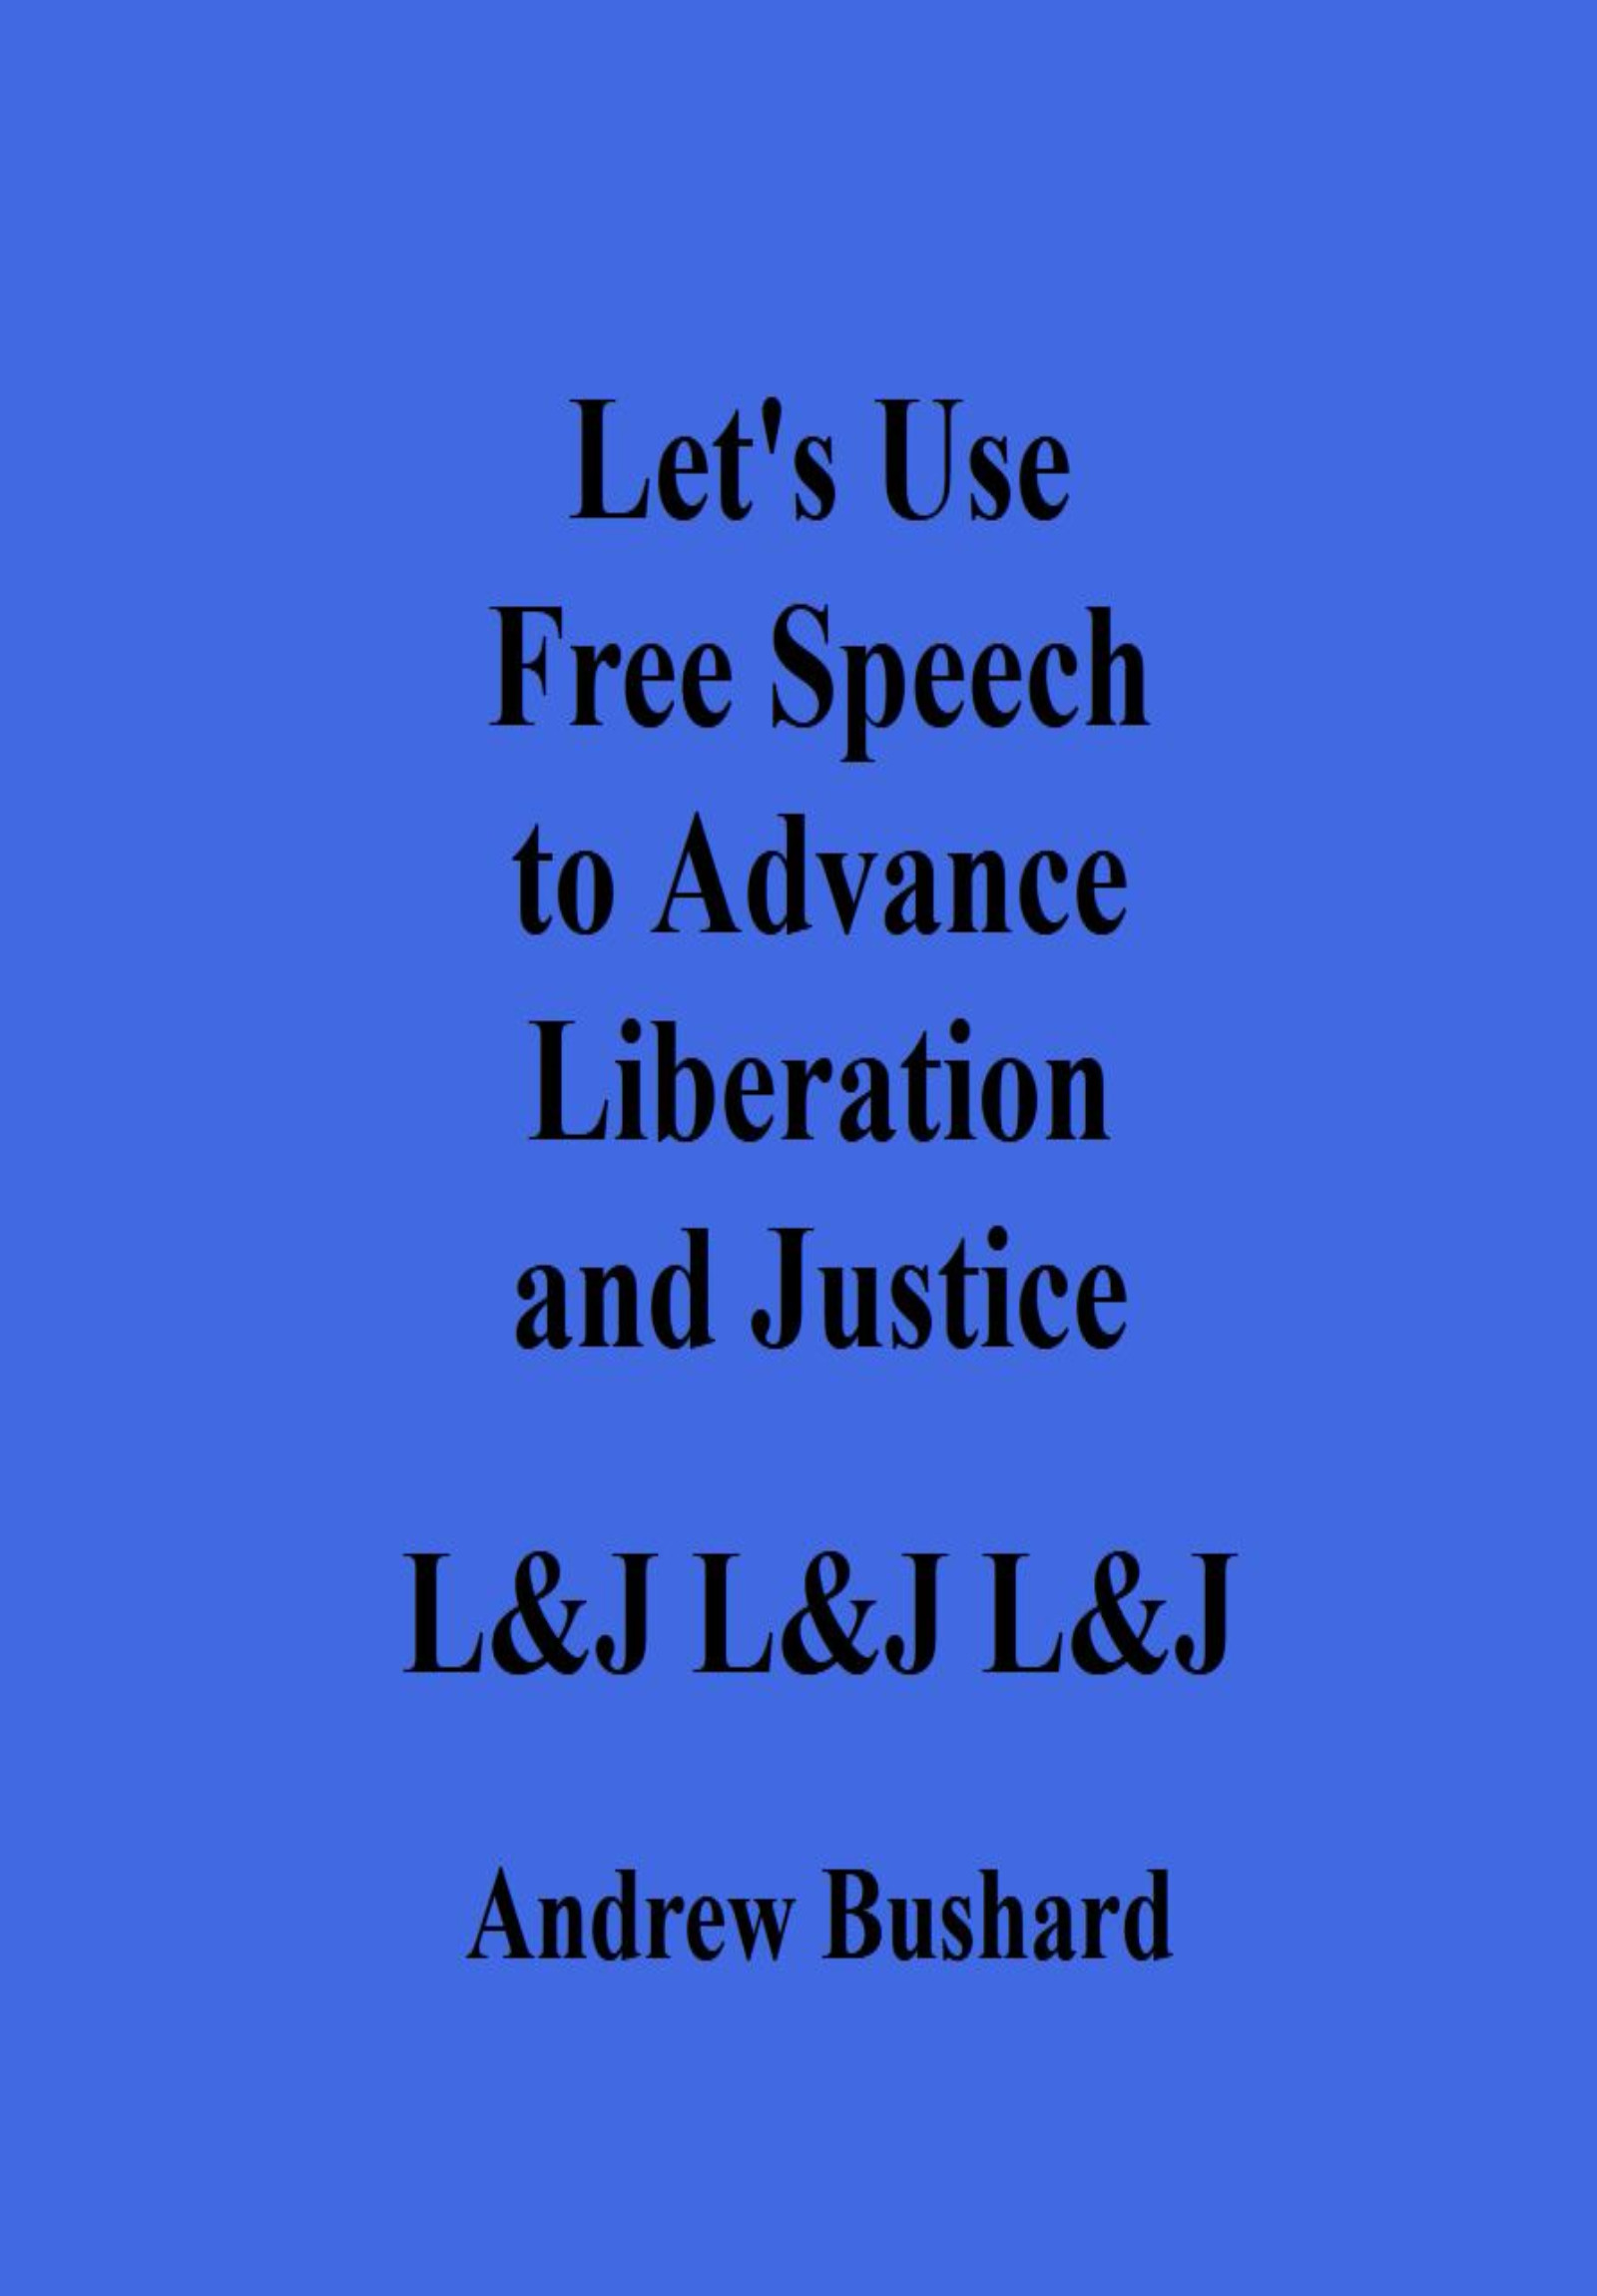 Let's Use Free Speech to Advance Liberation and Justice's featured image